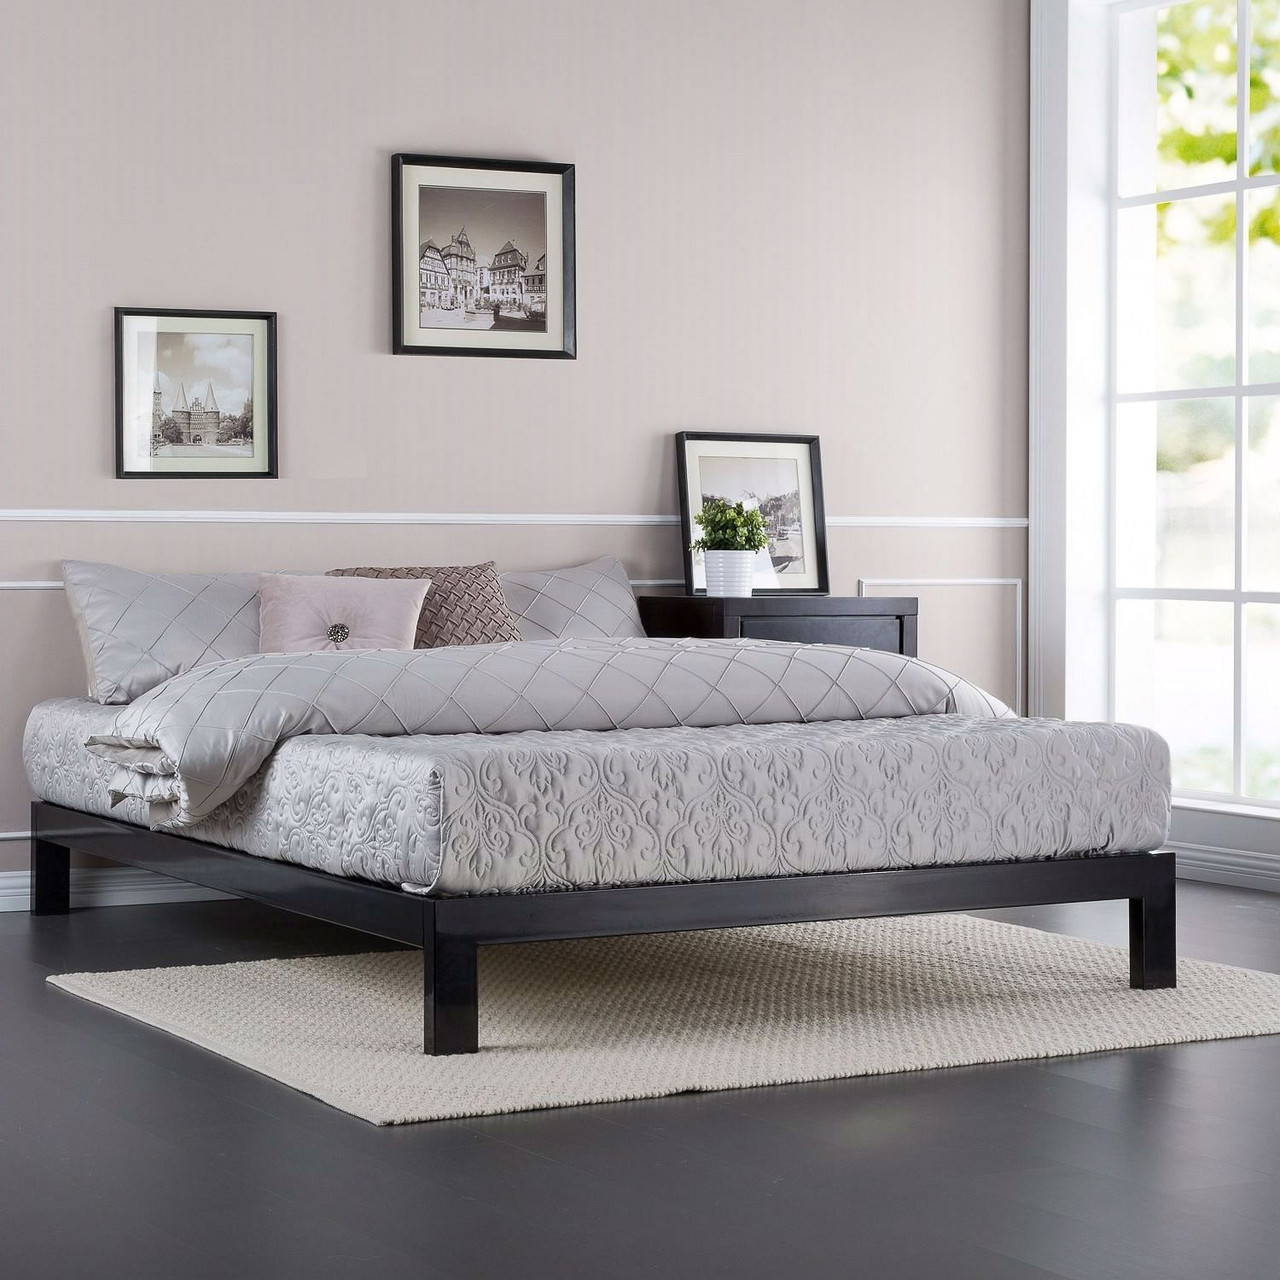 Full size Contemporary Black Metal Platform Bed with Wooden Slats